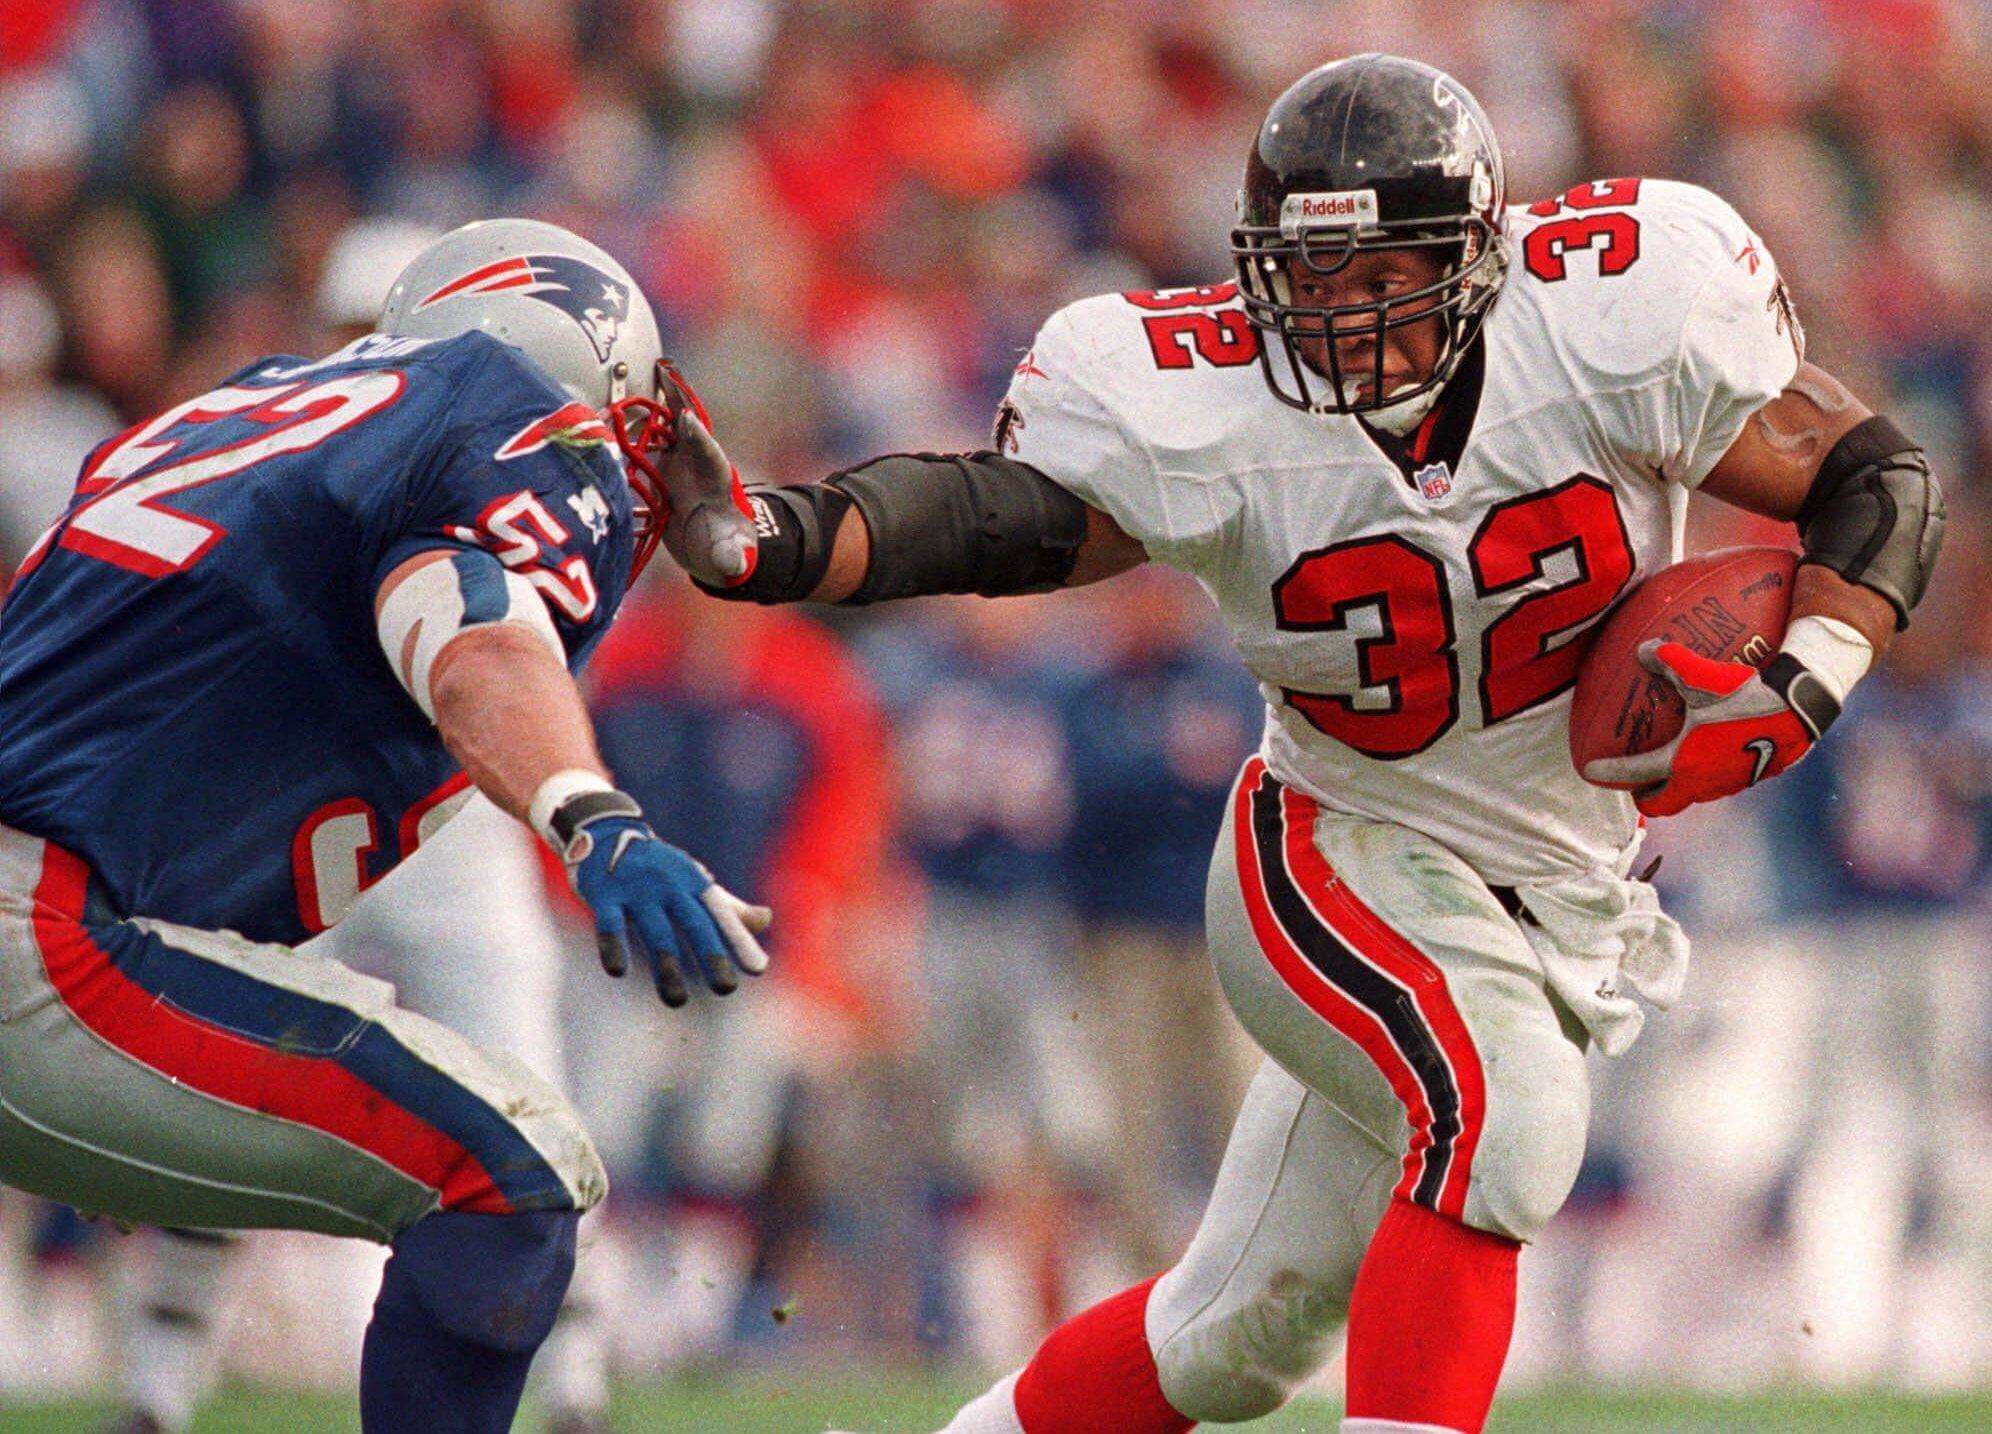 Atlanta Falcons running back Jamal Anderson (32) straight-arms New England Patriots linebacker Ted Johnson (52) in route to a second quarter touchdown at Foxboro Stadium in Foxboro, Mass., Sunday afternoon Nov. 8, 1998. The Falcons can do something even more unusual on Sunday. If they beat San Francisco, they'll be alone in first place the NFC West this late for the first time since 1980. The game is so big that it's a rare sellout at the Georgia Dome and one ofthe few times the Falcons are the attraction, not the 49ers. (AP Photo/Winslow Townson)